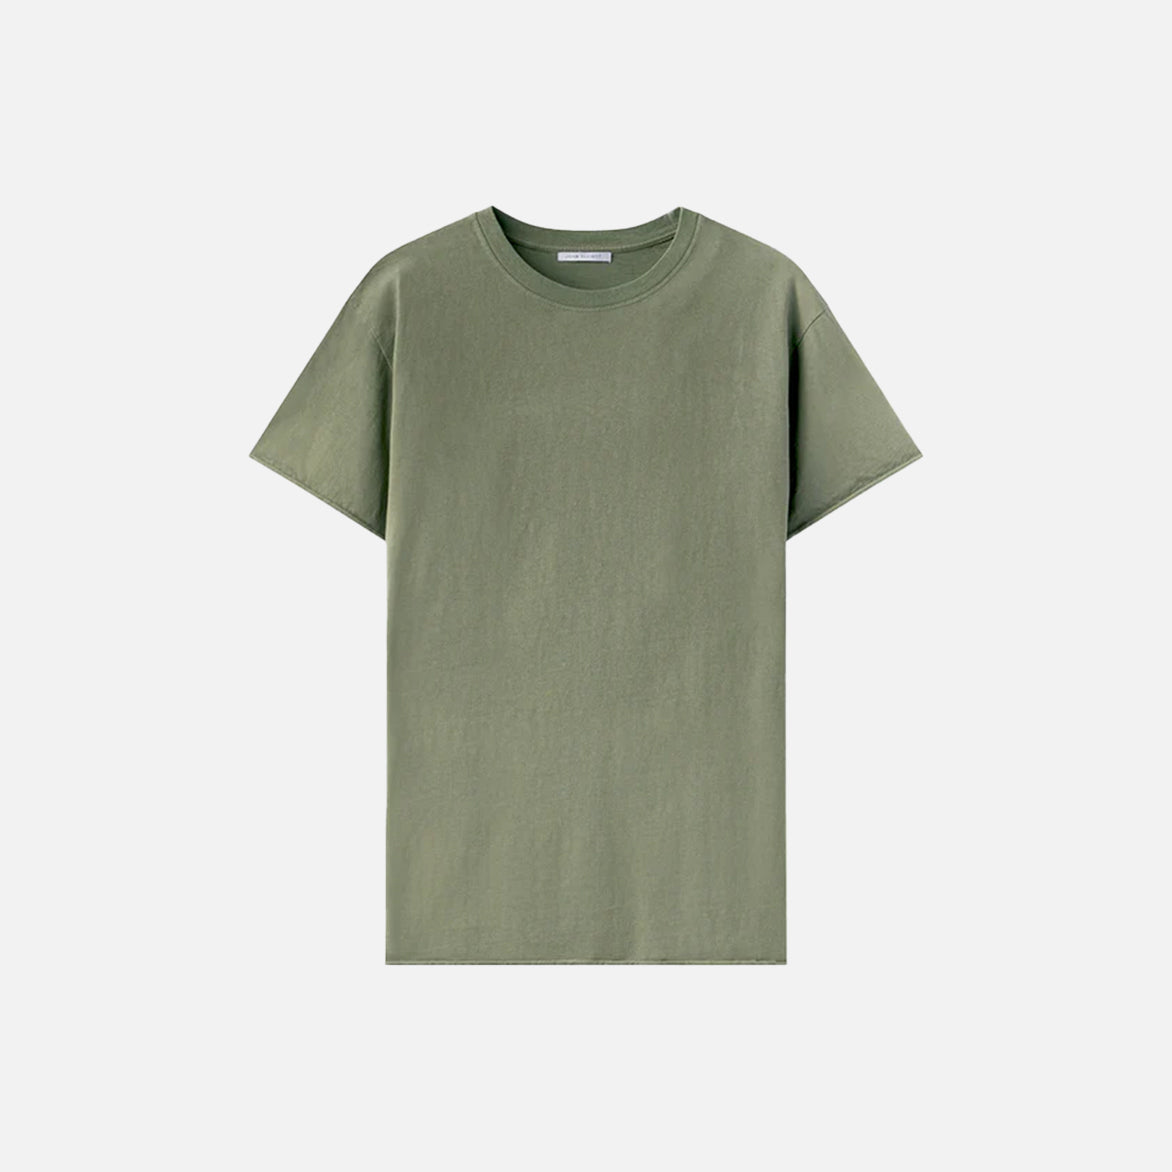 ANTI-EXPO TEE - SOLDIER GREEN